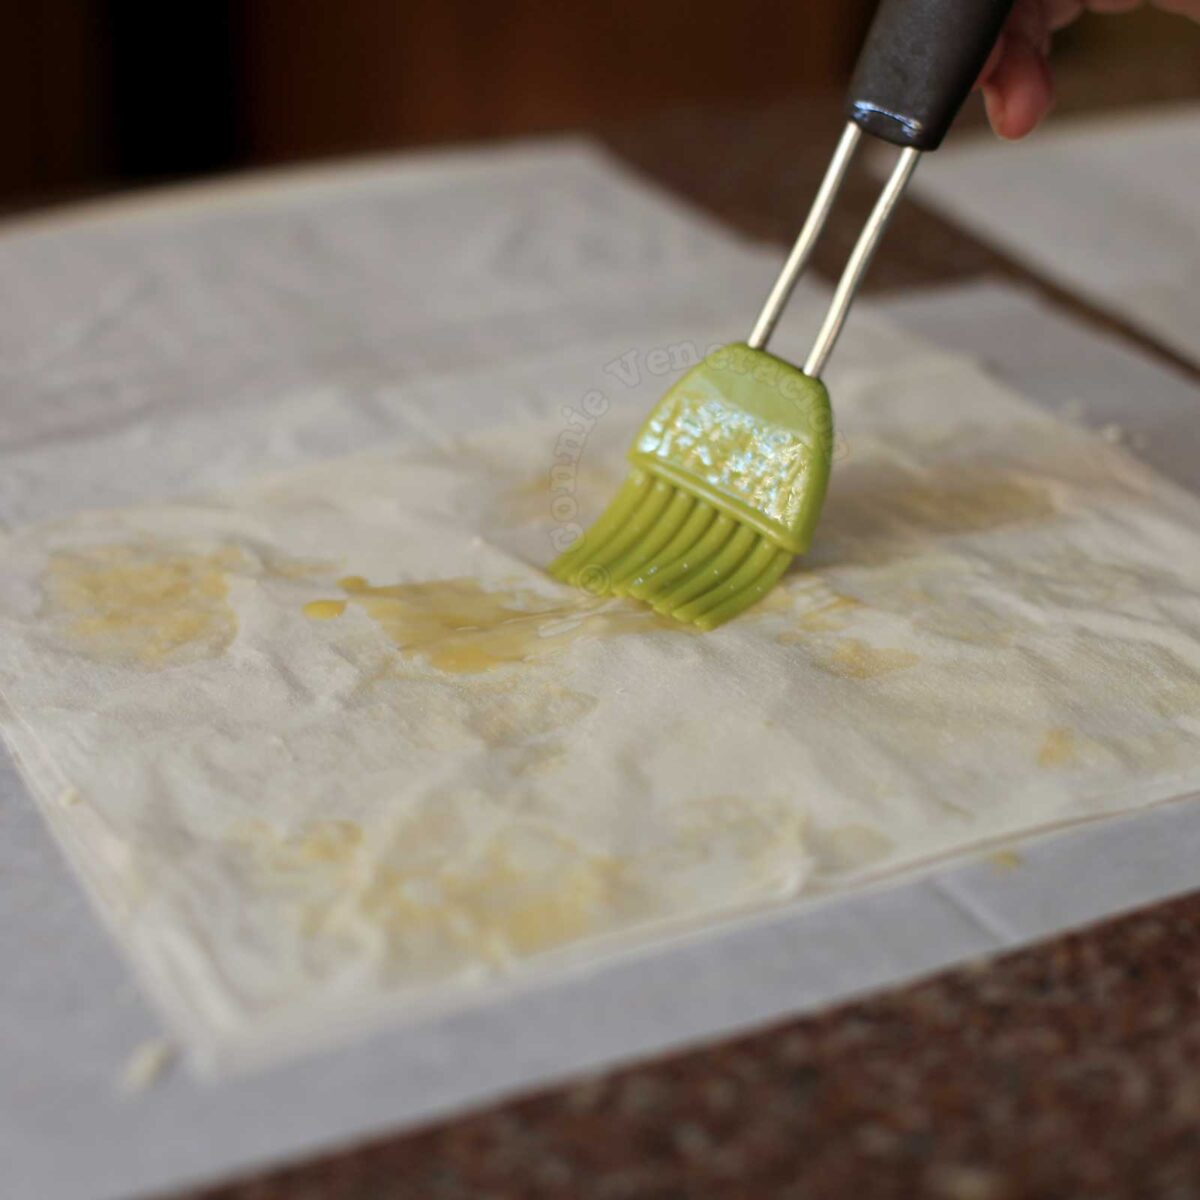 Brushing phyllo (fillo, filo) pastry with melted butter